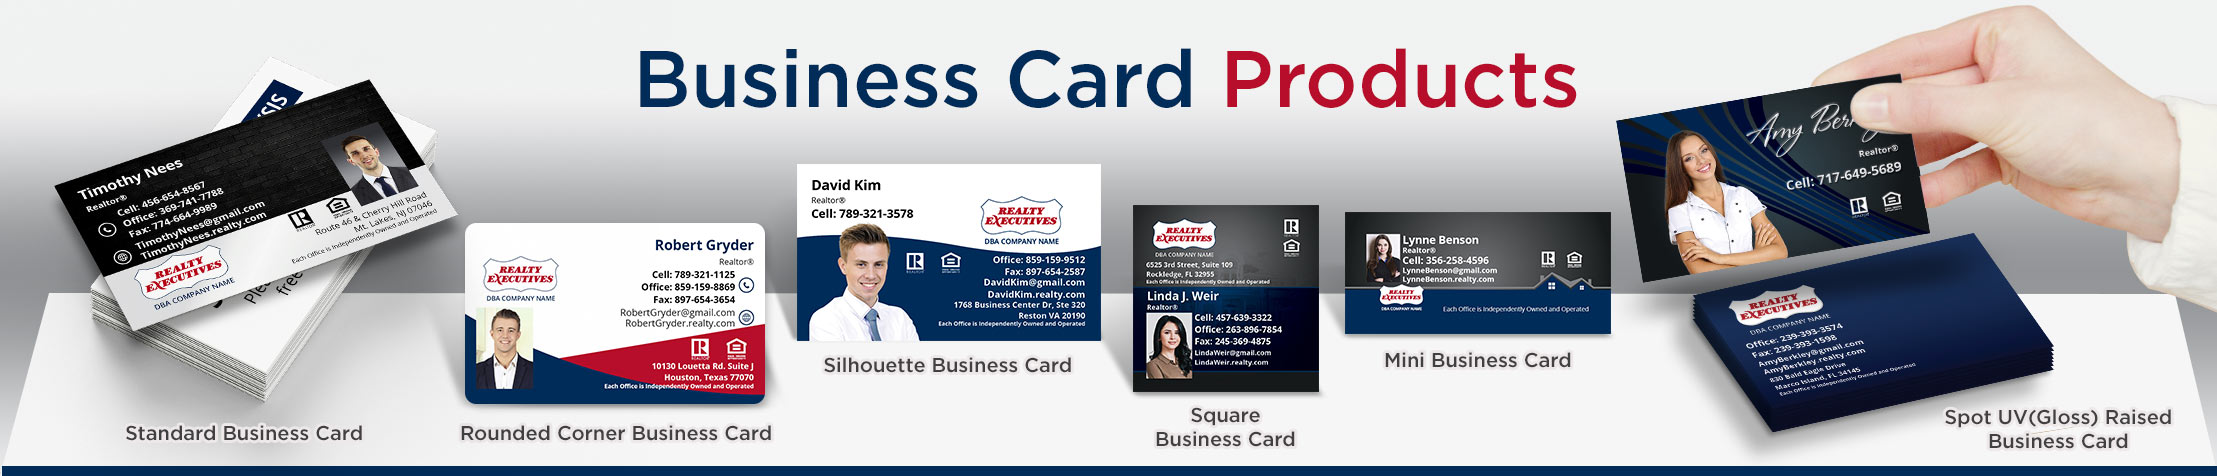 Realty Executives Real Estate Business Card Products - Realty Executives  - Unique, Custom Business Cards Printed on Quality Stock with Creative Designs for Realtors | BestPrintBuy.com